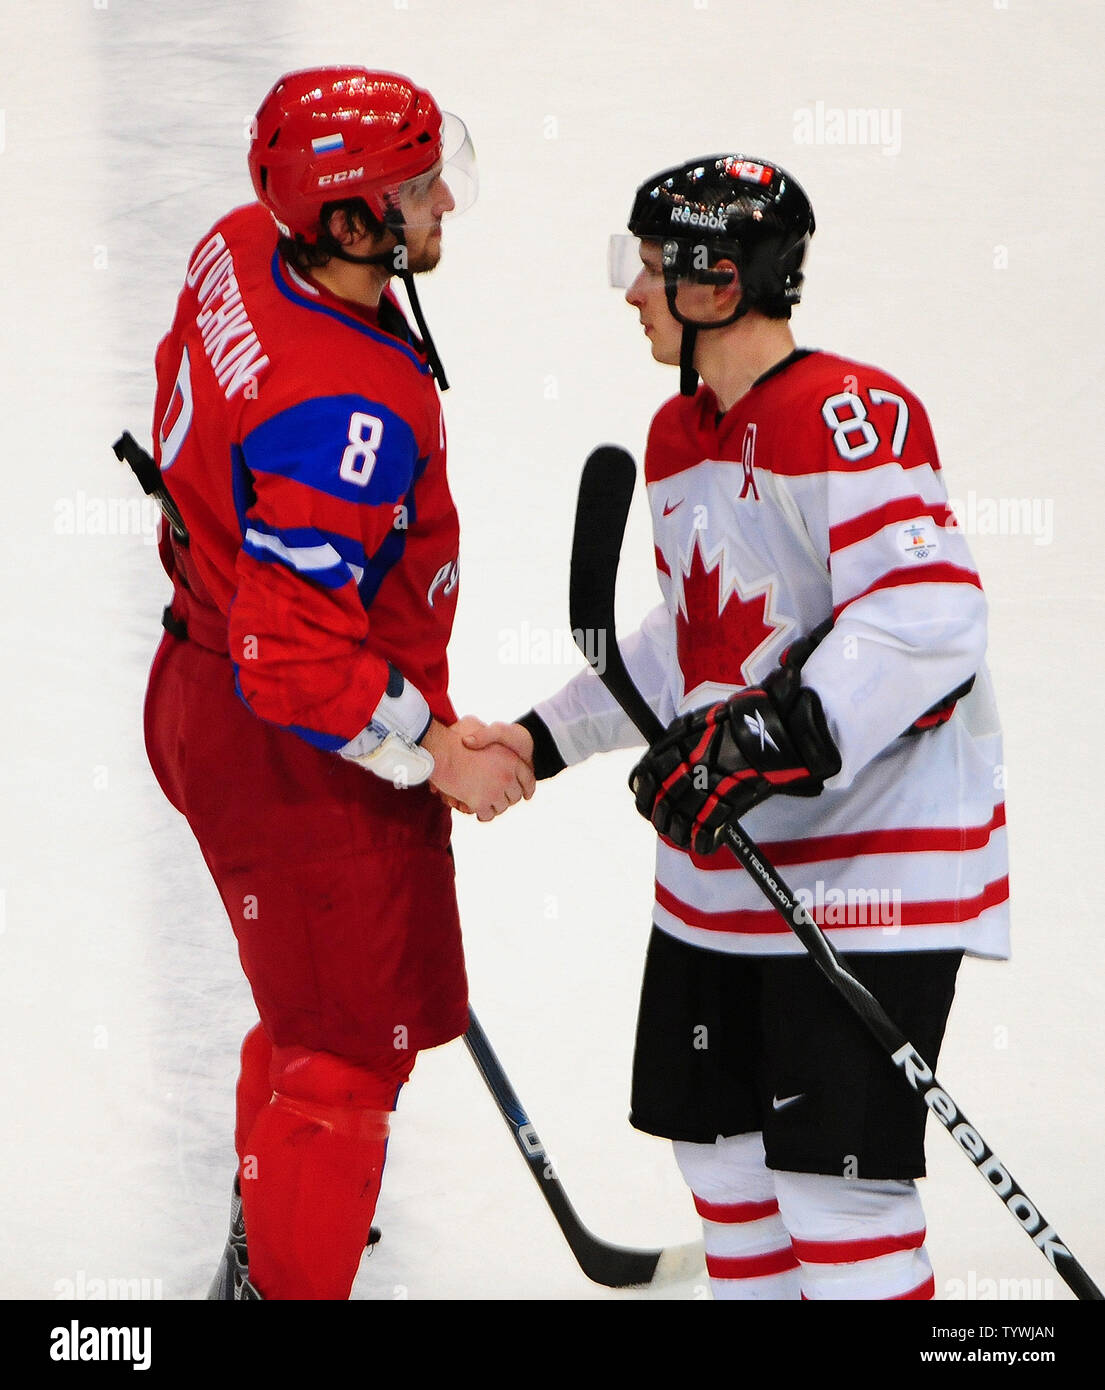 Winter Olympics: Alex Ovechkin struggling, but Russia finds a way